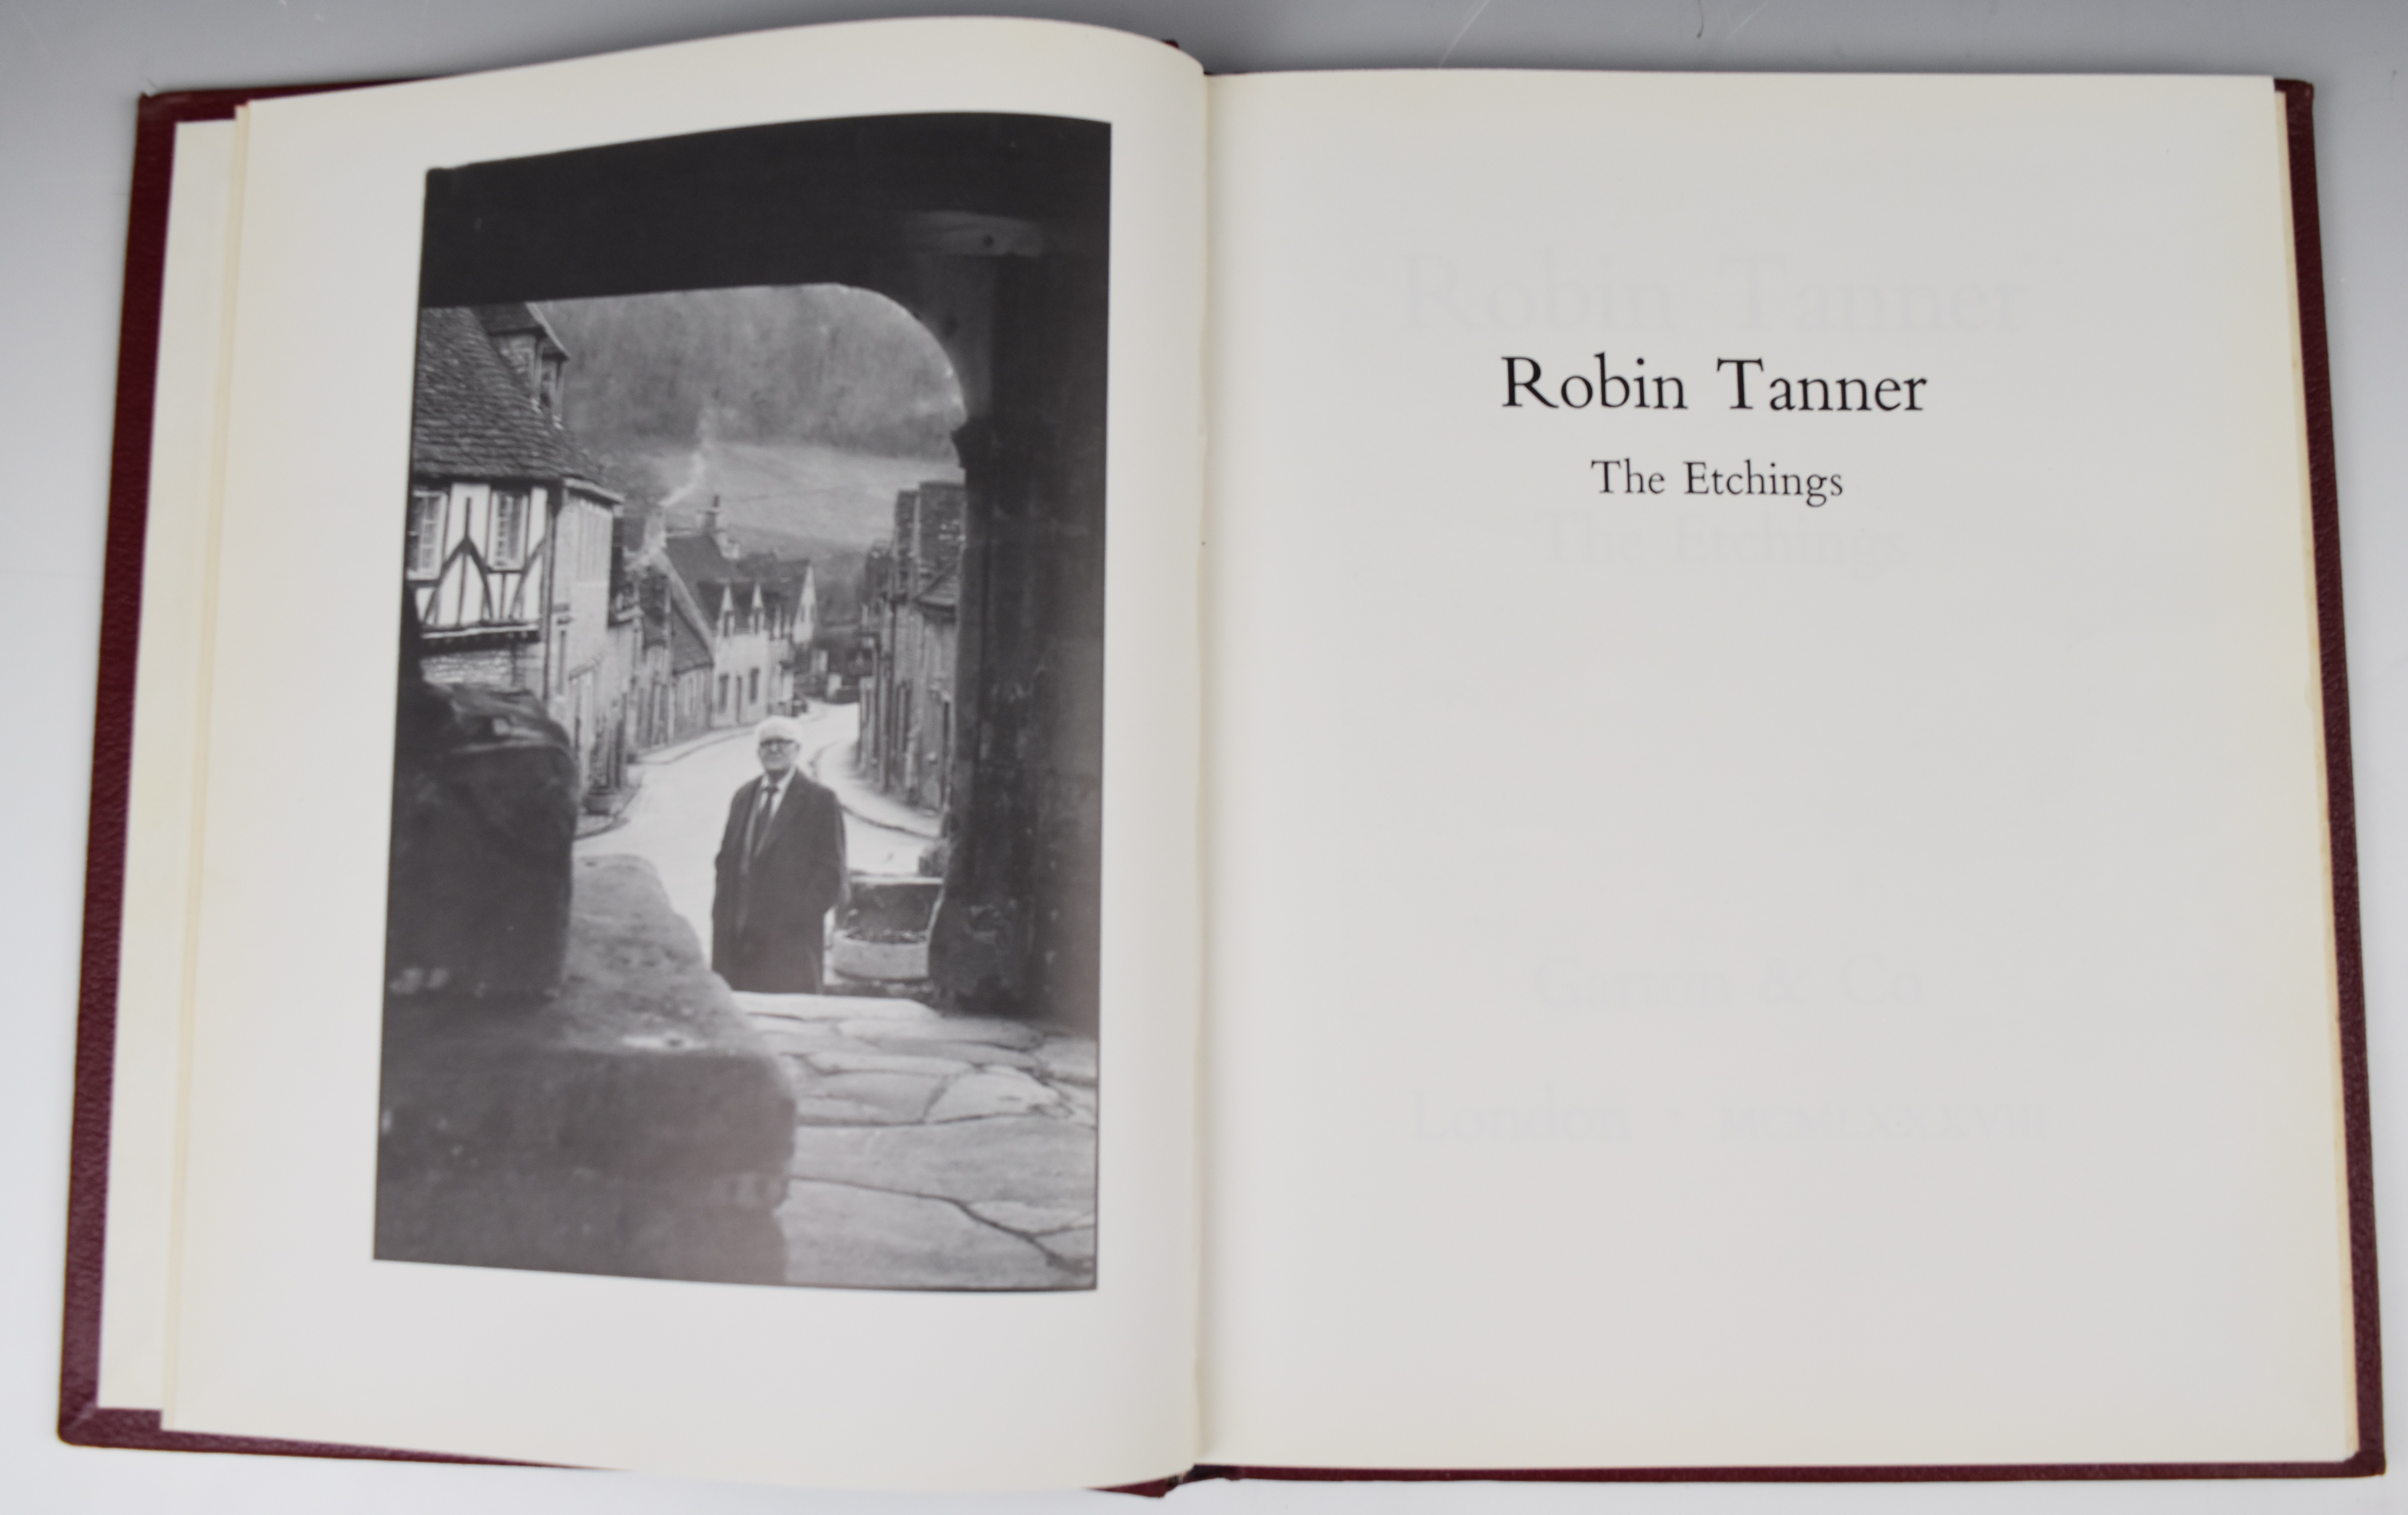 Robin Tanner, The Etchings, published Garton & Co 1988, first edition limited to 1000 copies, this - Image 2 of 8